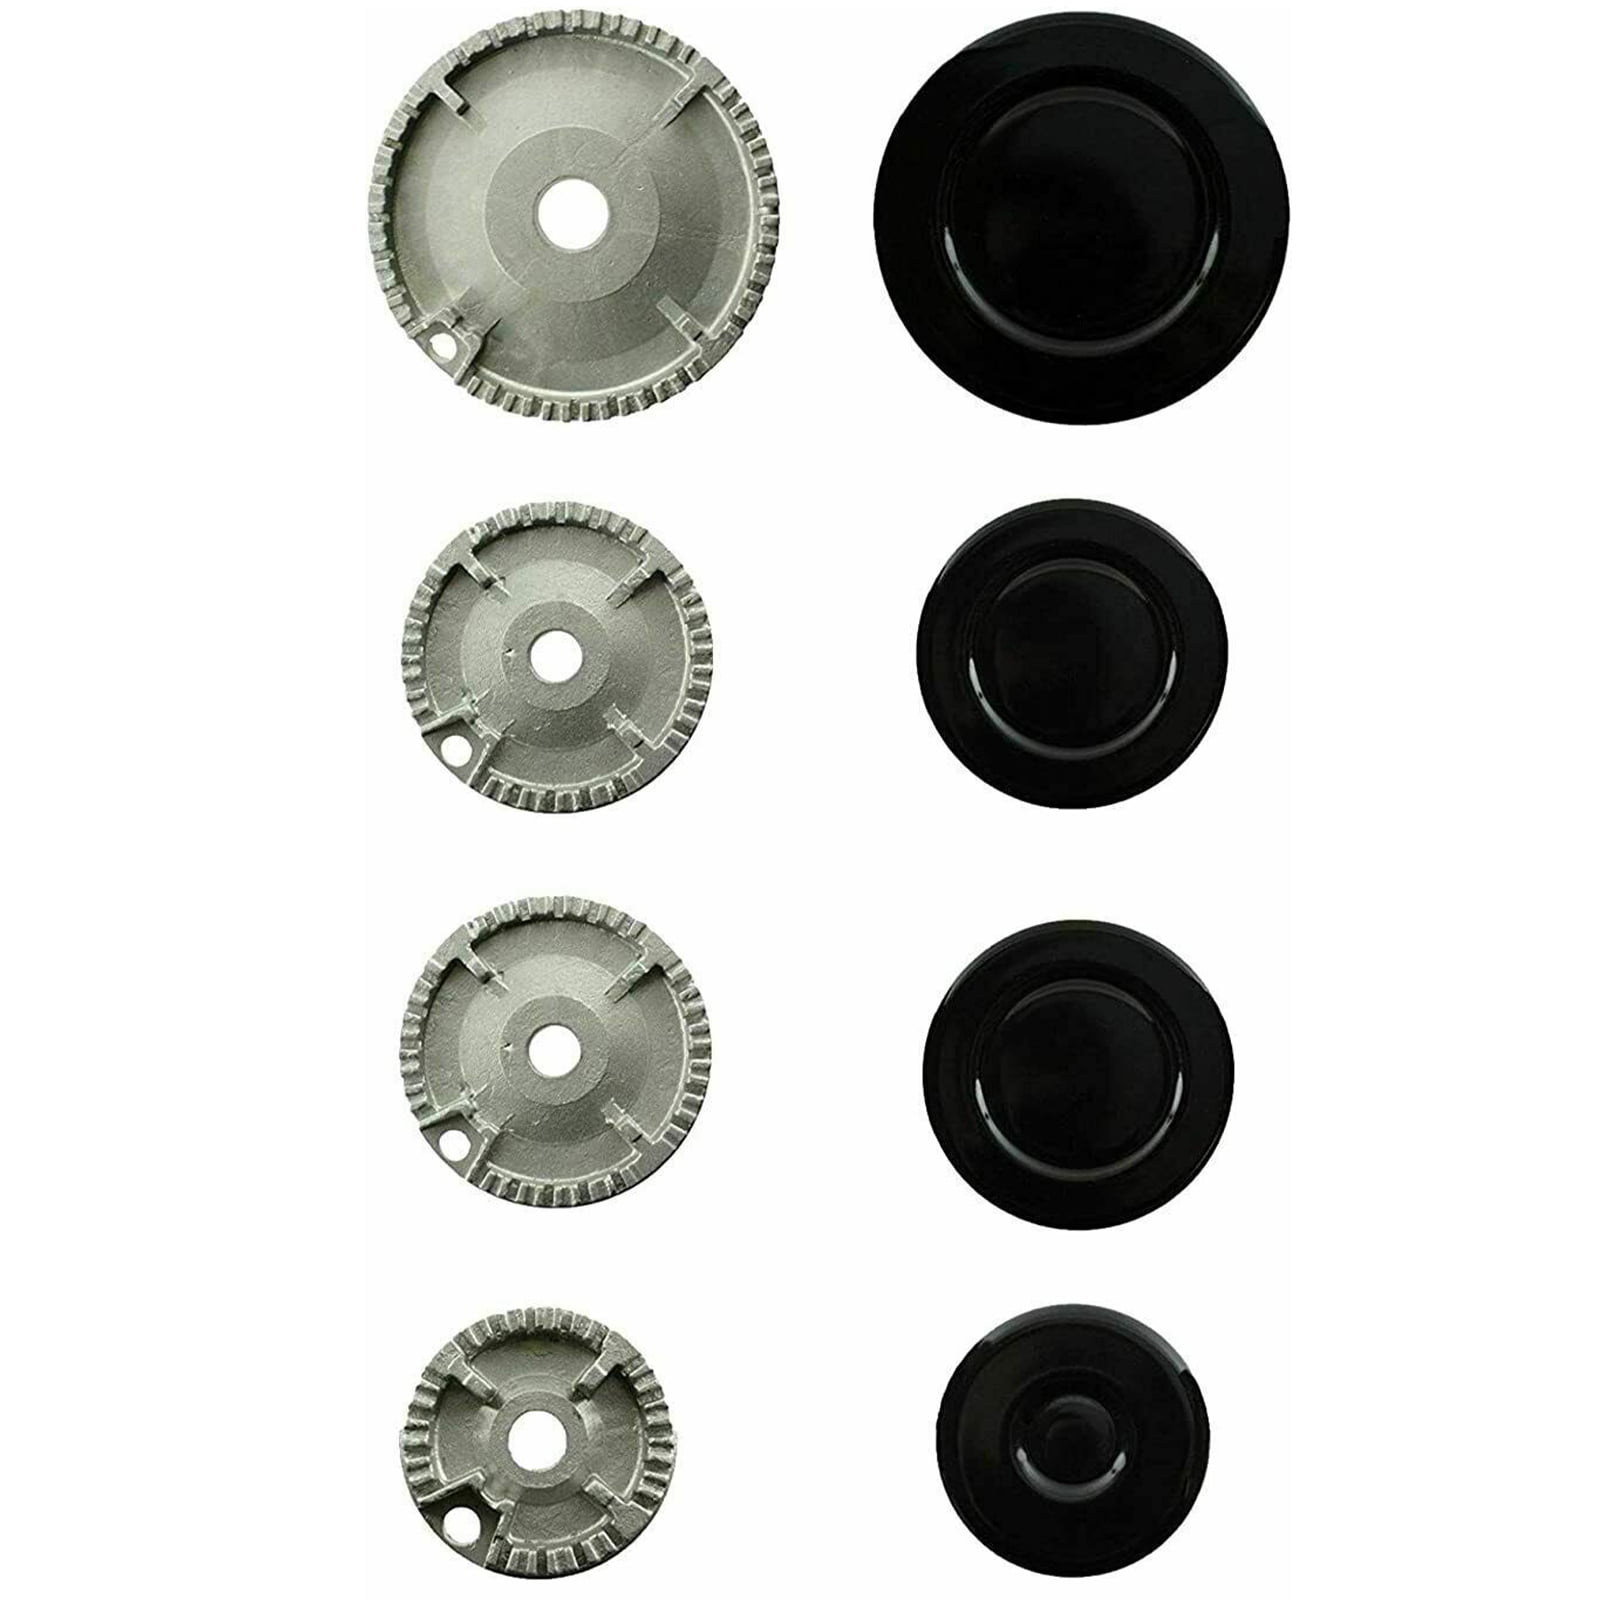 Gas Hob Burner Crown & Flame Cap Set for WHIRLPOOL Cookers All Sizes 55-100mm 